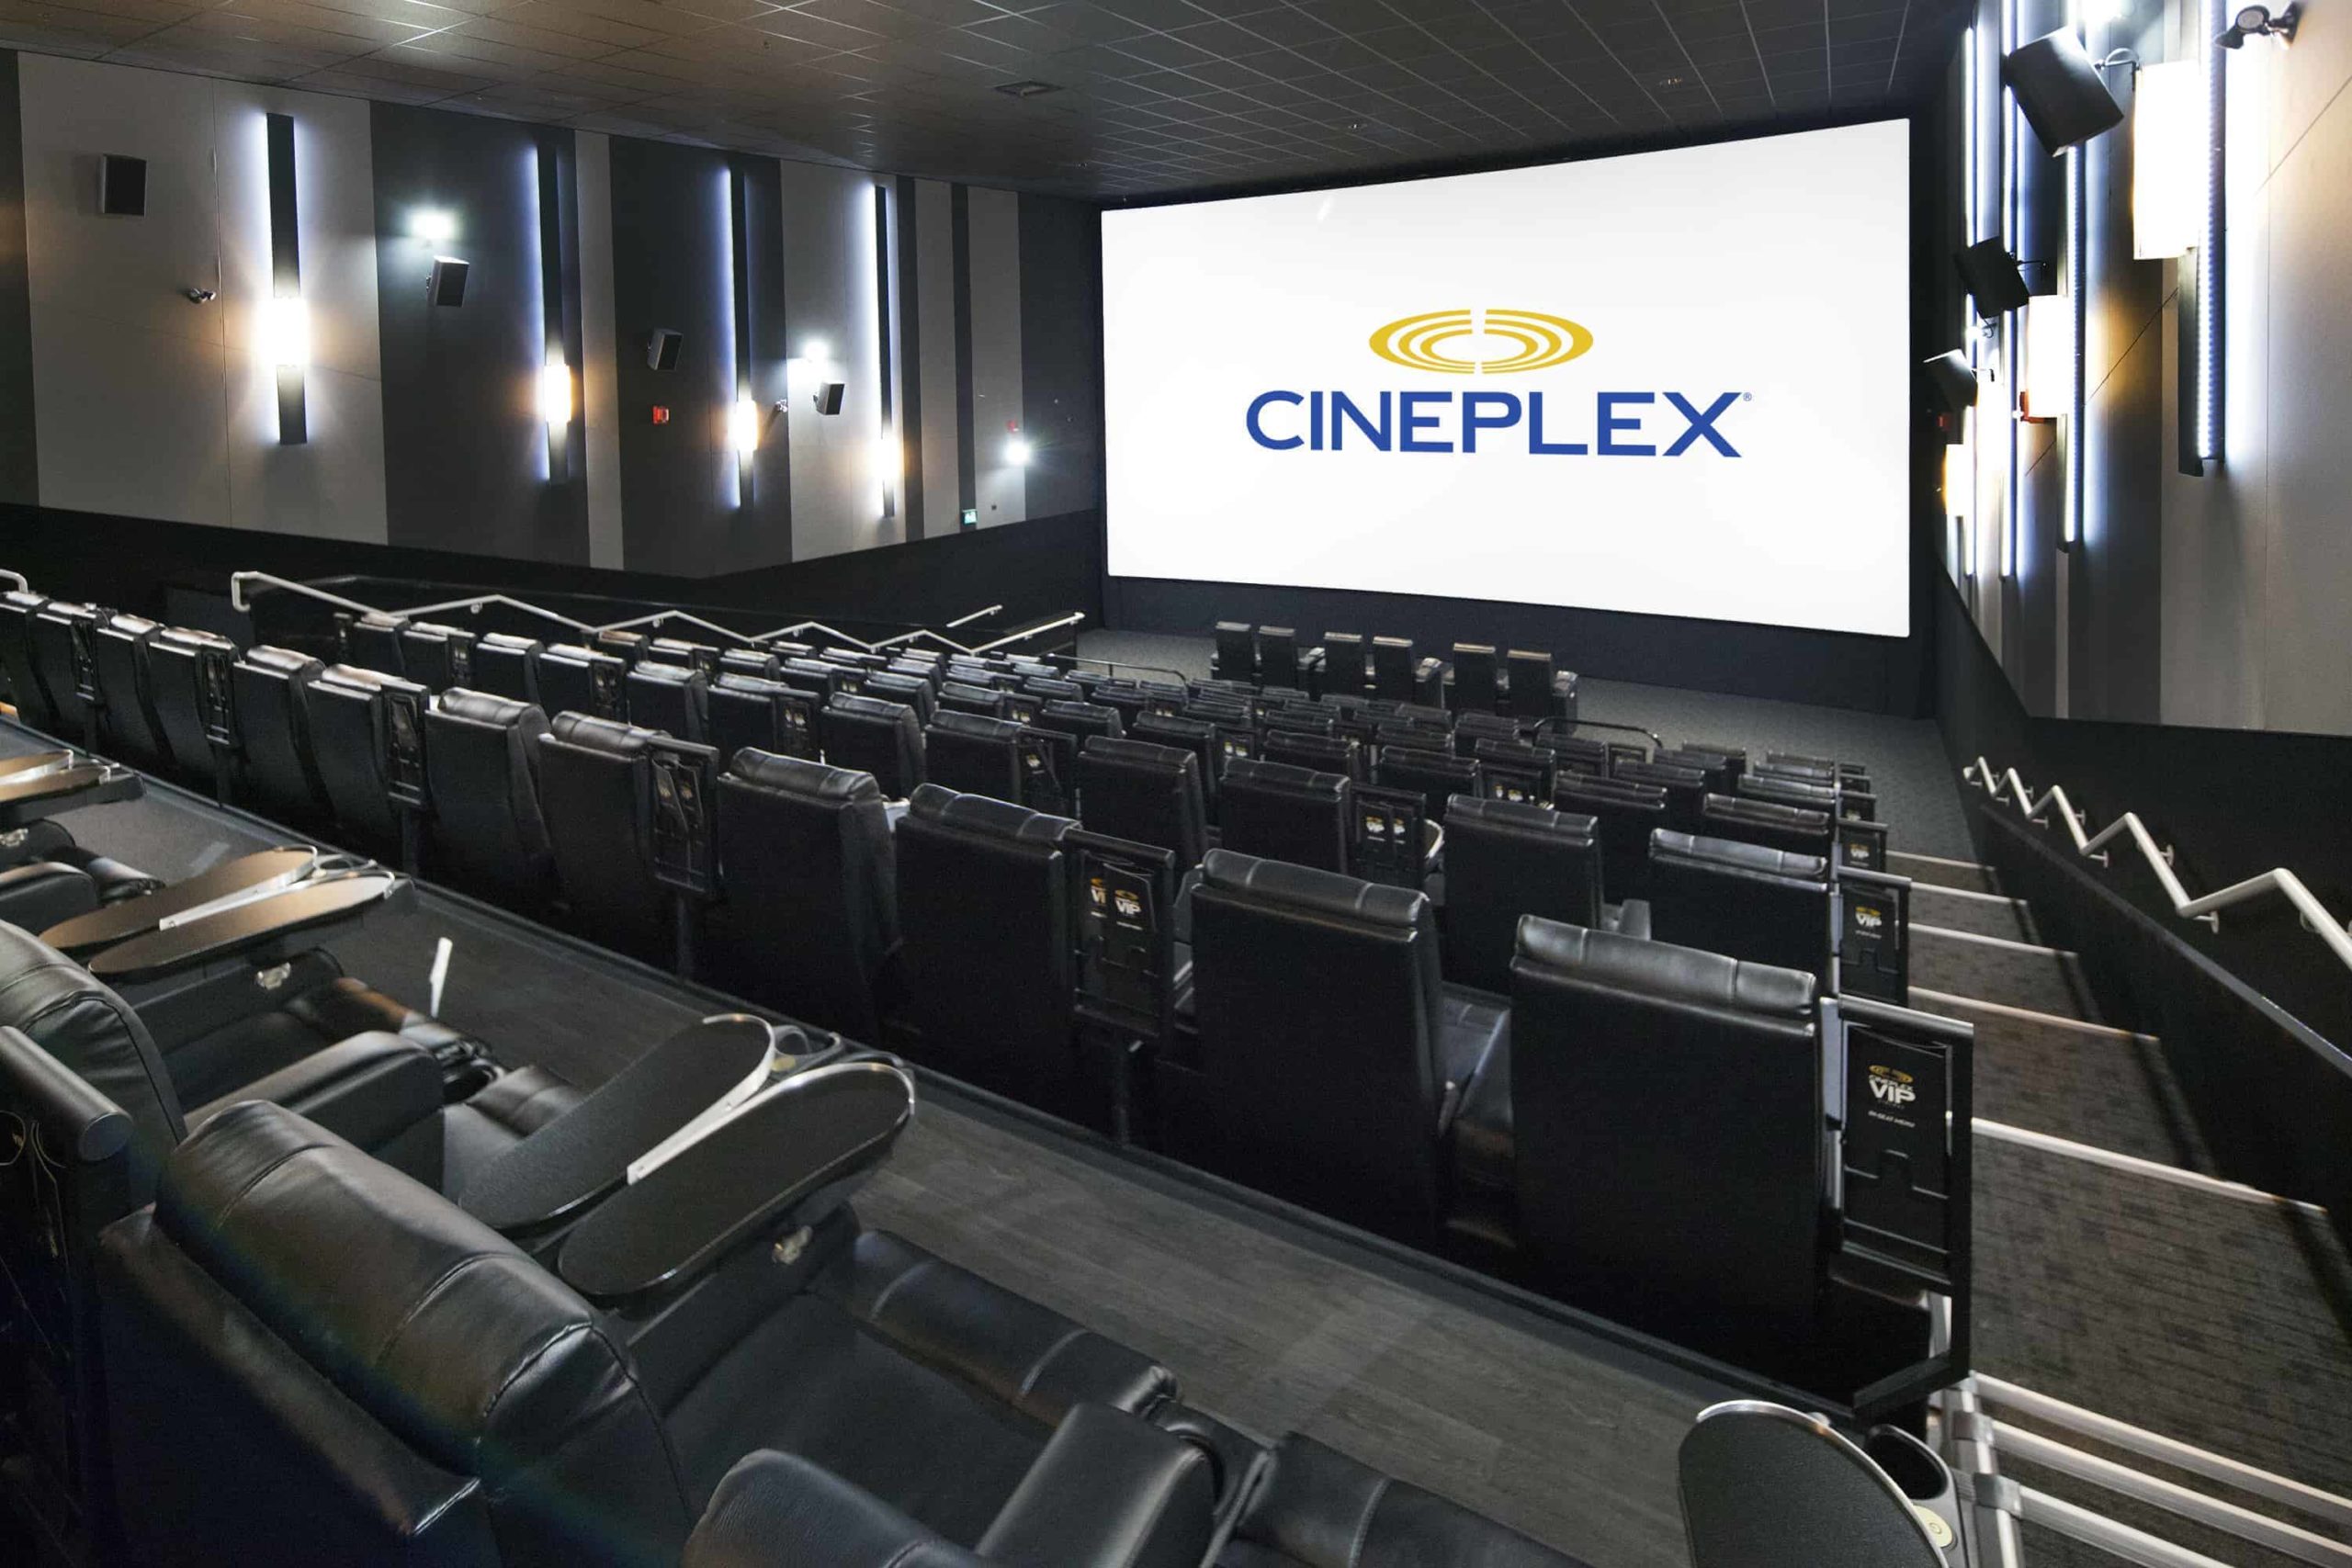 #GoodDeals: Cineplex is offering select showtimes for $2.99 in Metro-Vancouver this month